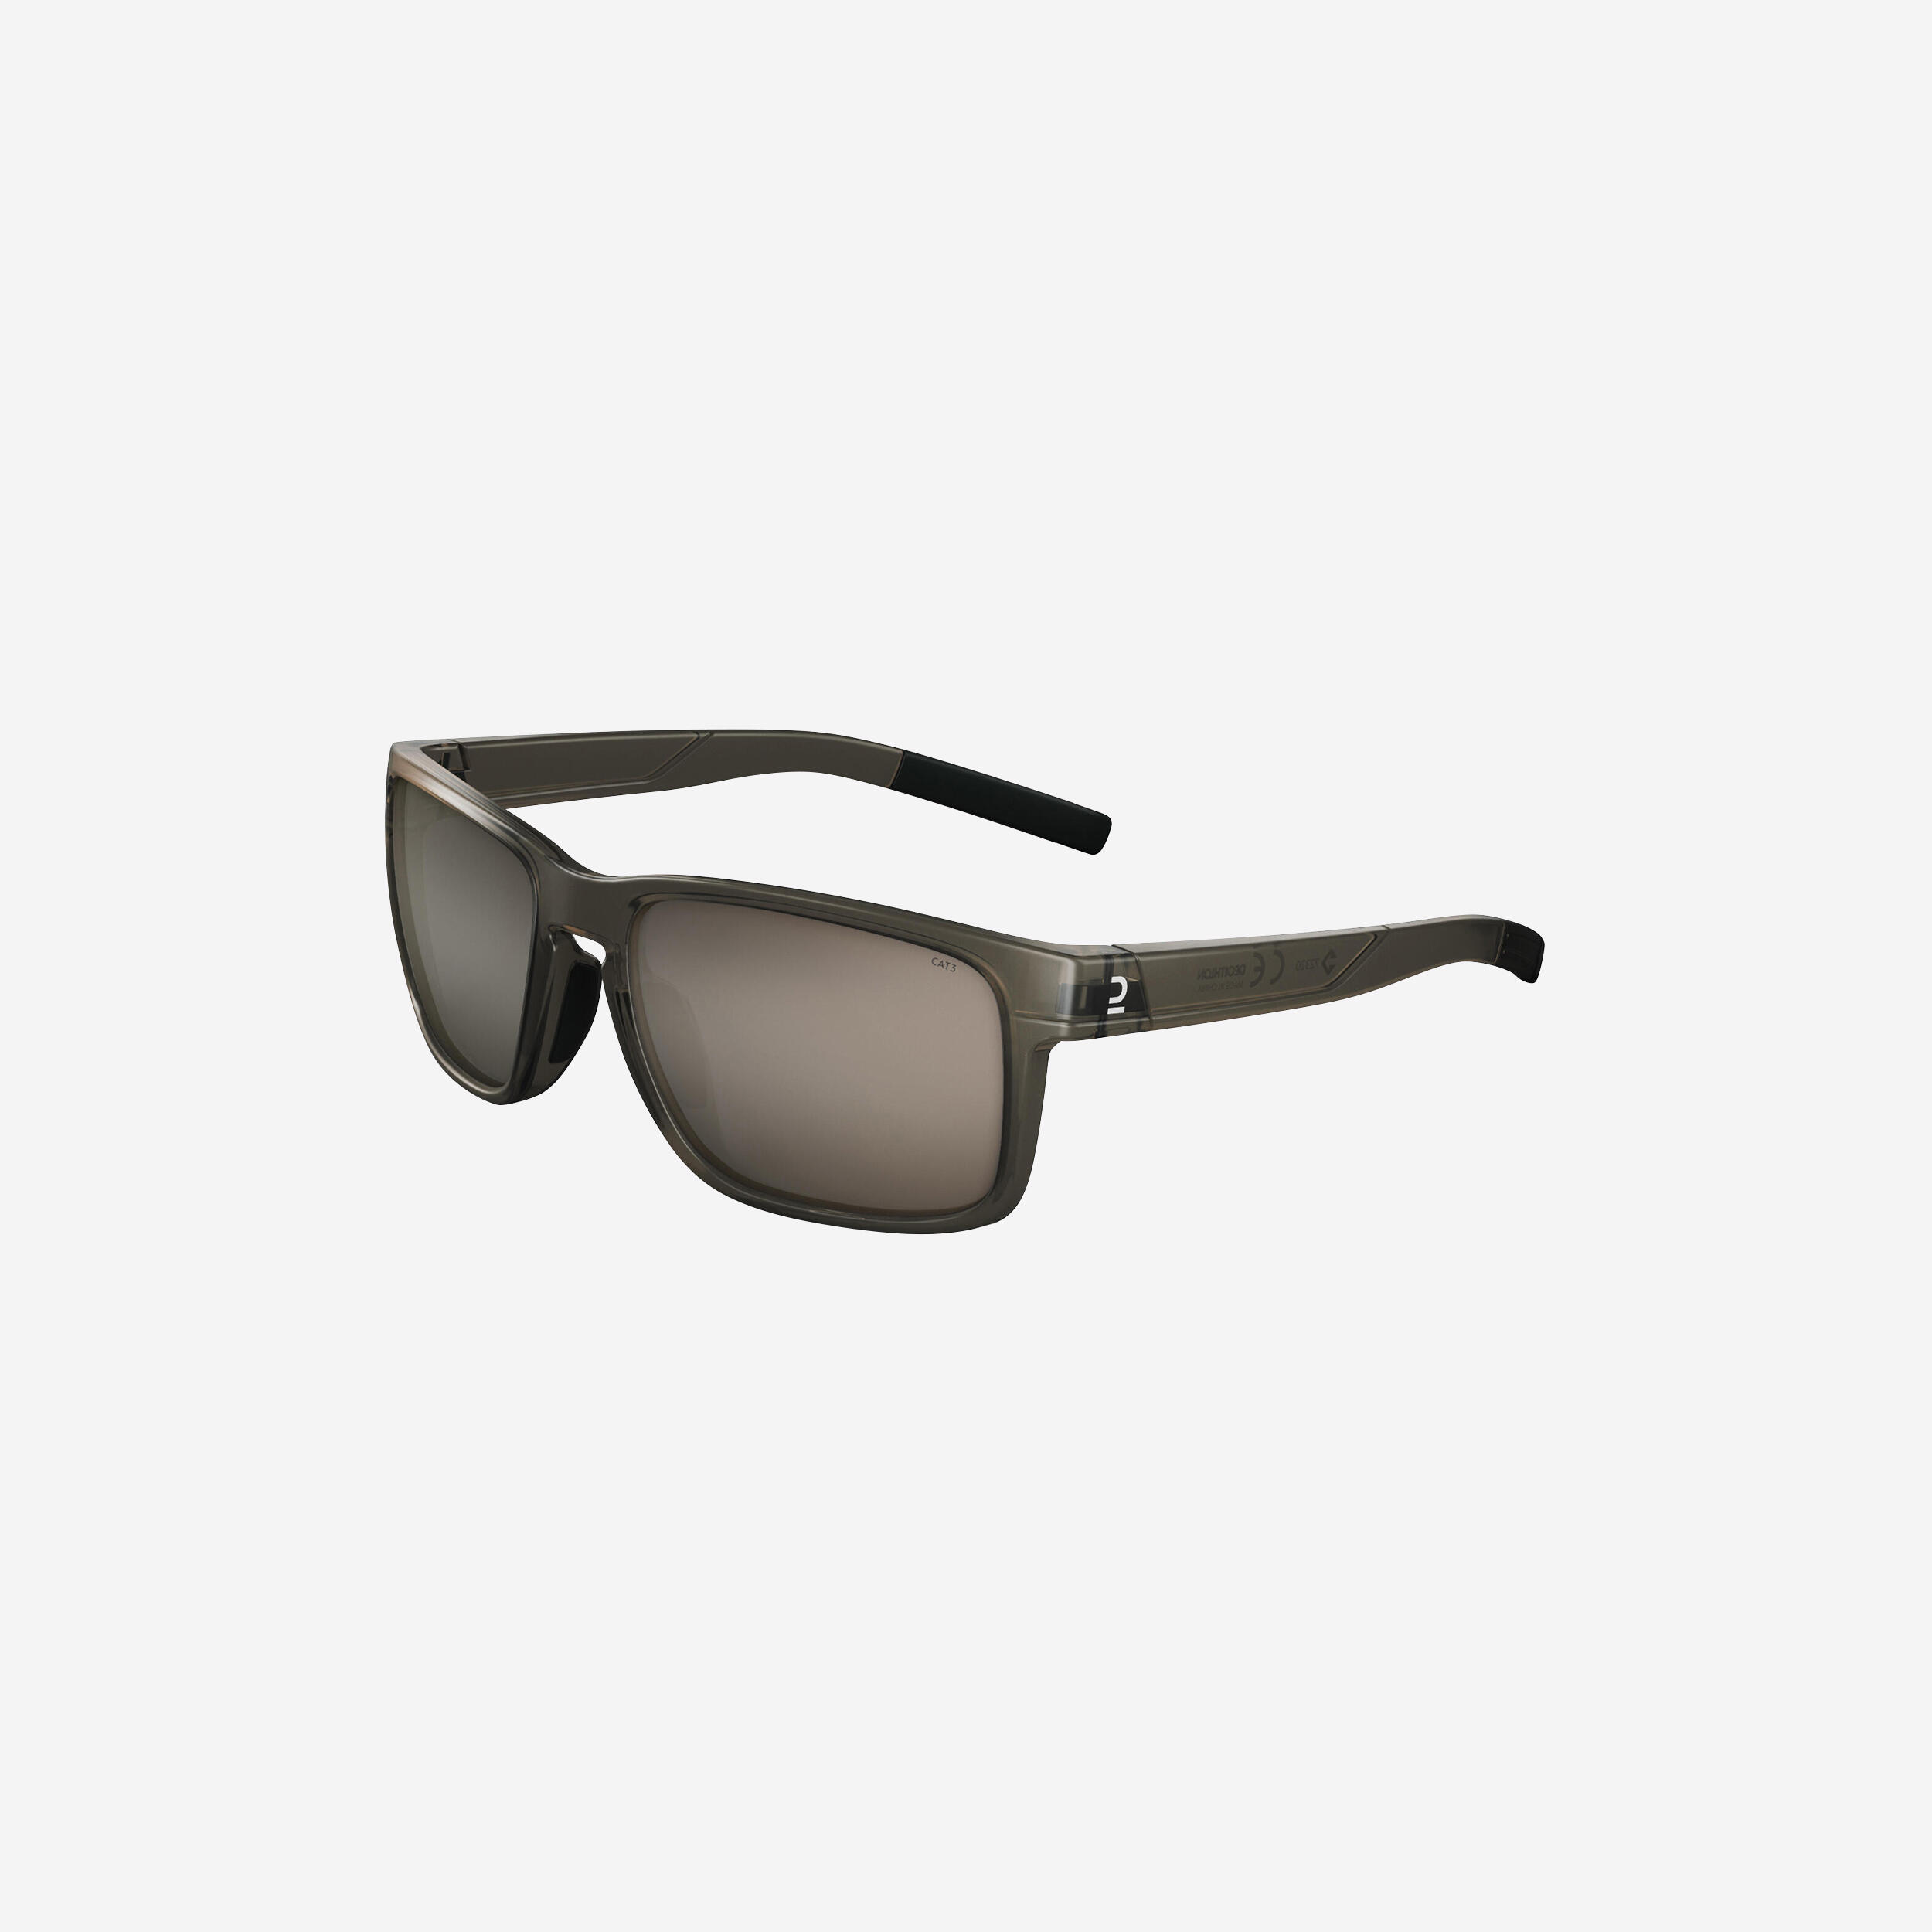 QUECHUA Adult hiking sunglasses – MH530 – Category 3